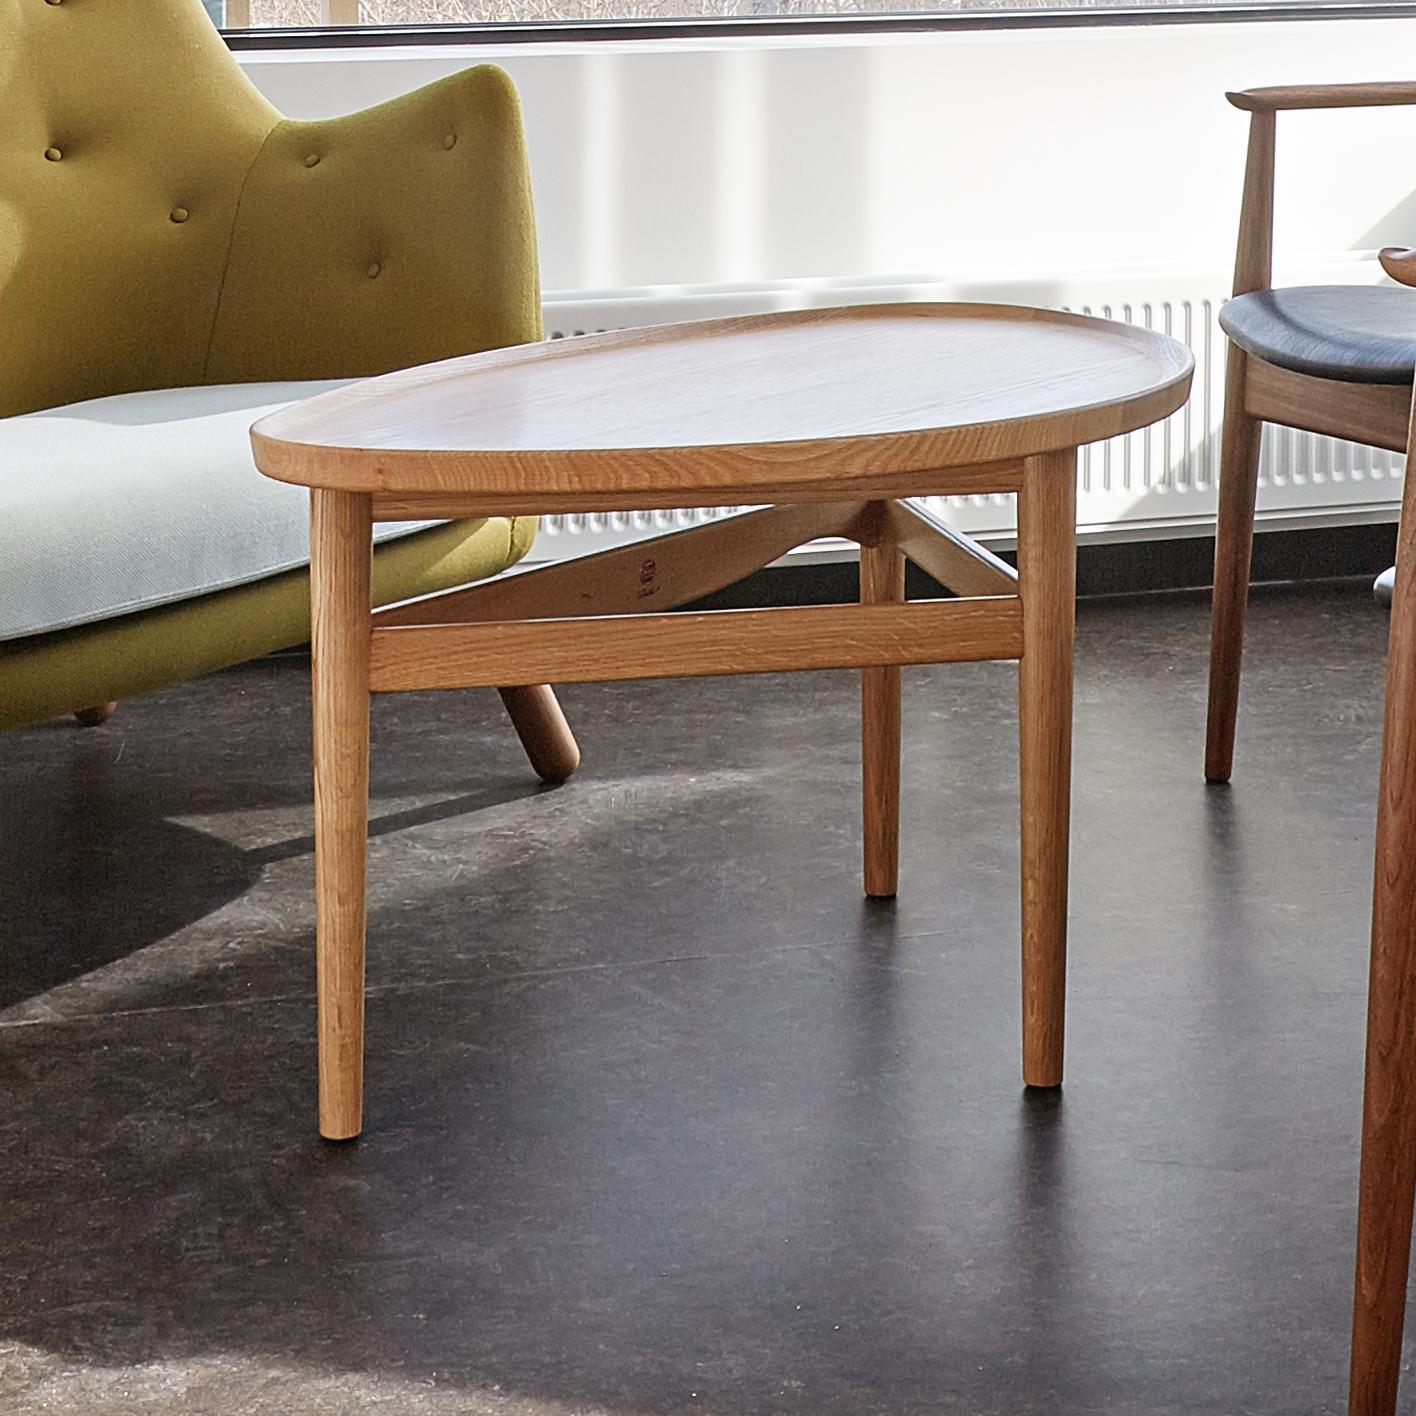 Table designed by Finn Juhl in 1948, relaunched in 2008.
Manufactured by House of Finn Juhl in Denmark.

This eye-shaped, three-legged table was originally designed to match the 46 sofa.

The shape of the table fits perfectly with the curve of